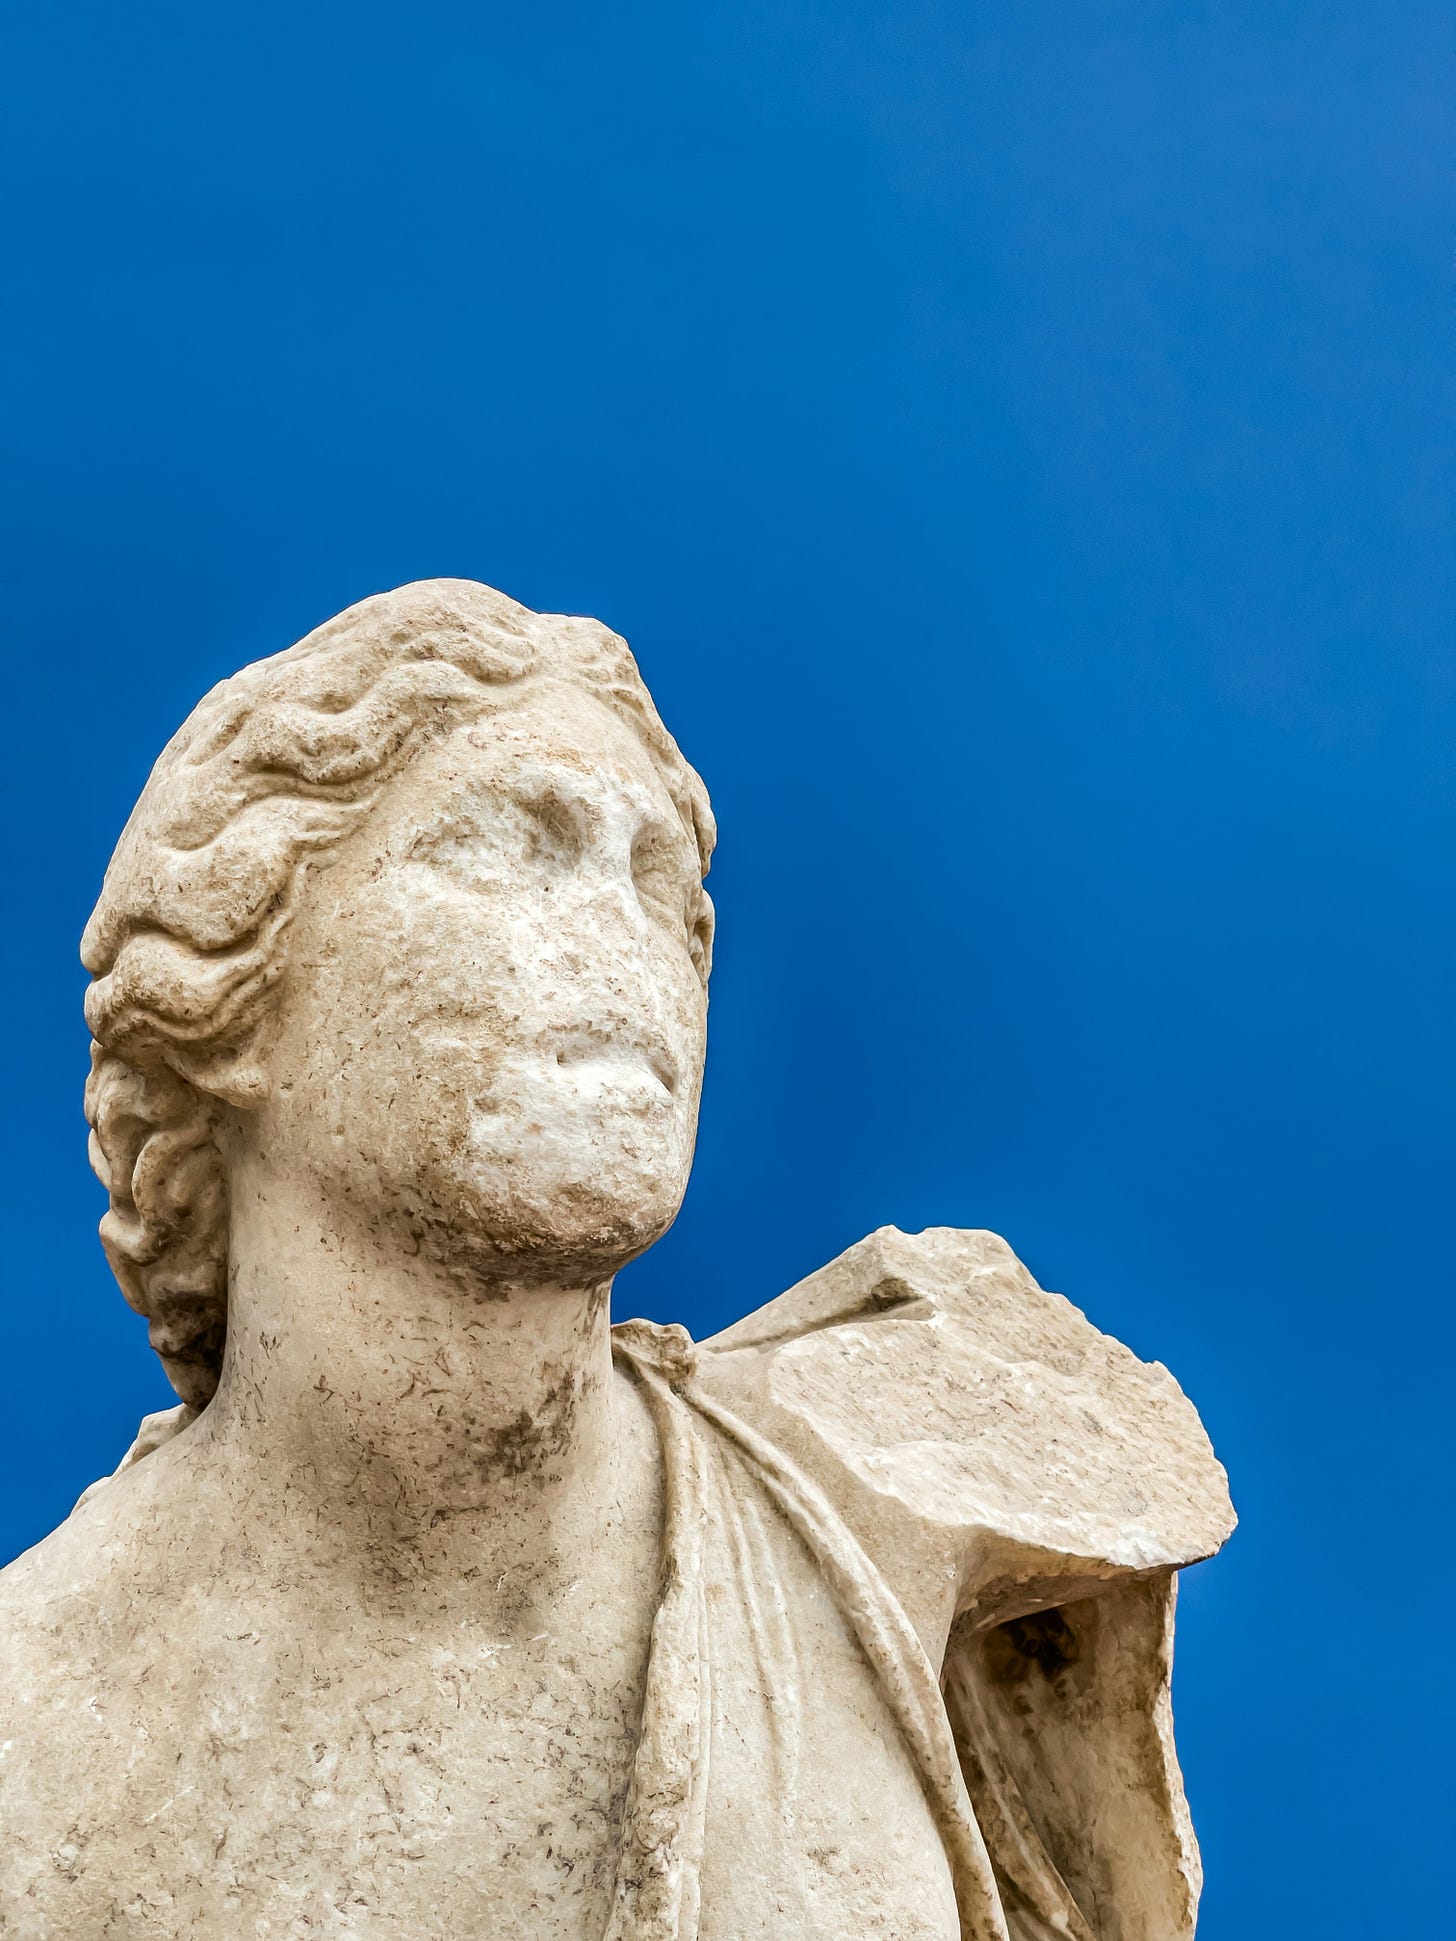 Photo of broken and worn stone or marble statue against a blue background.